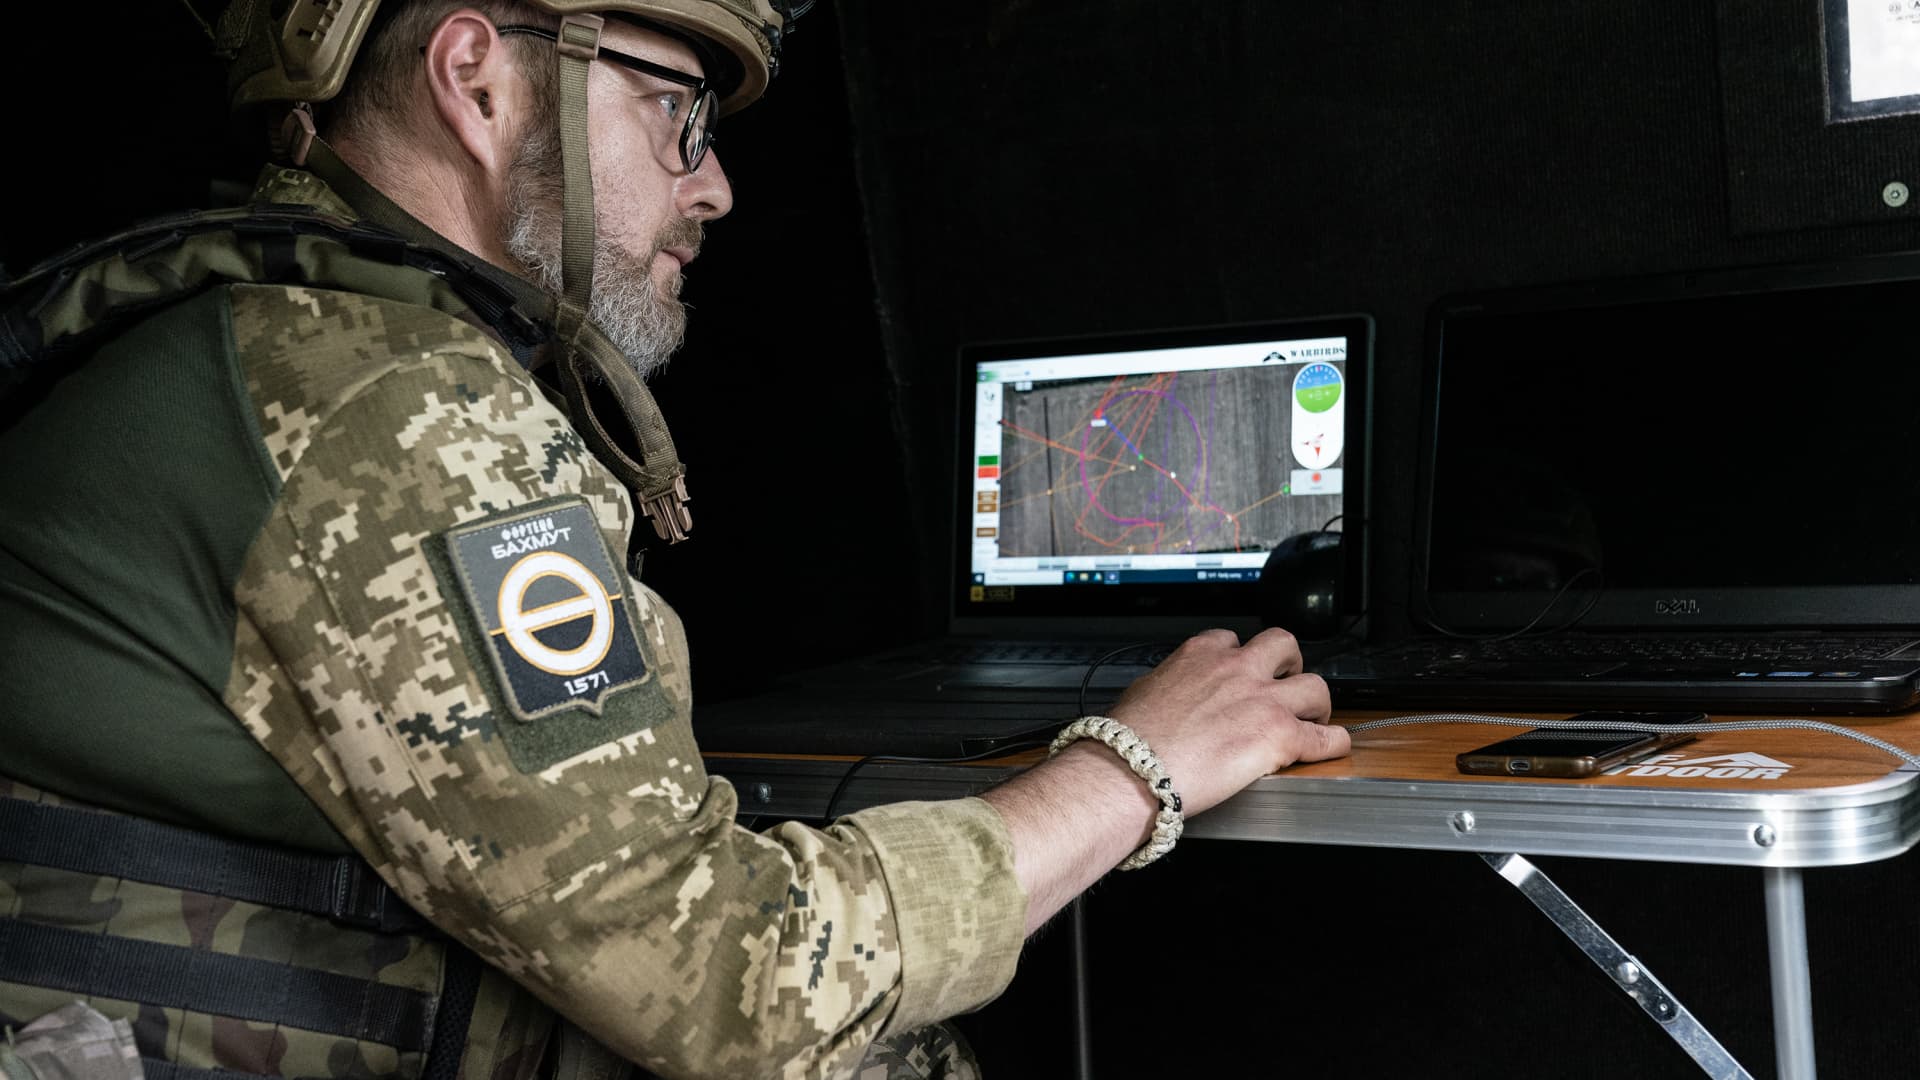 Member of Ukrainian Army Forces operates Aviation Systems of Ukraine Valkyrja drone designed and produced in Ukraine used for reconnaissance of Russian positions in undisclosed location near town of New York Donetsk region.